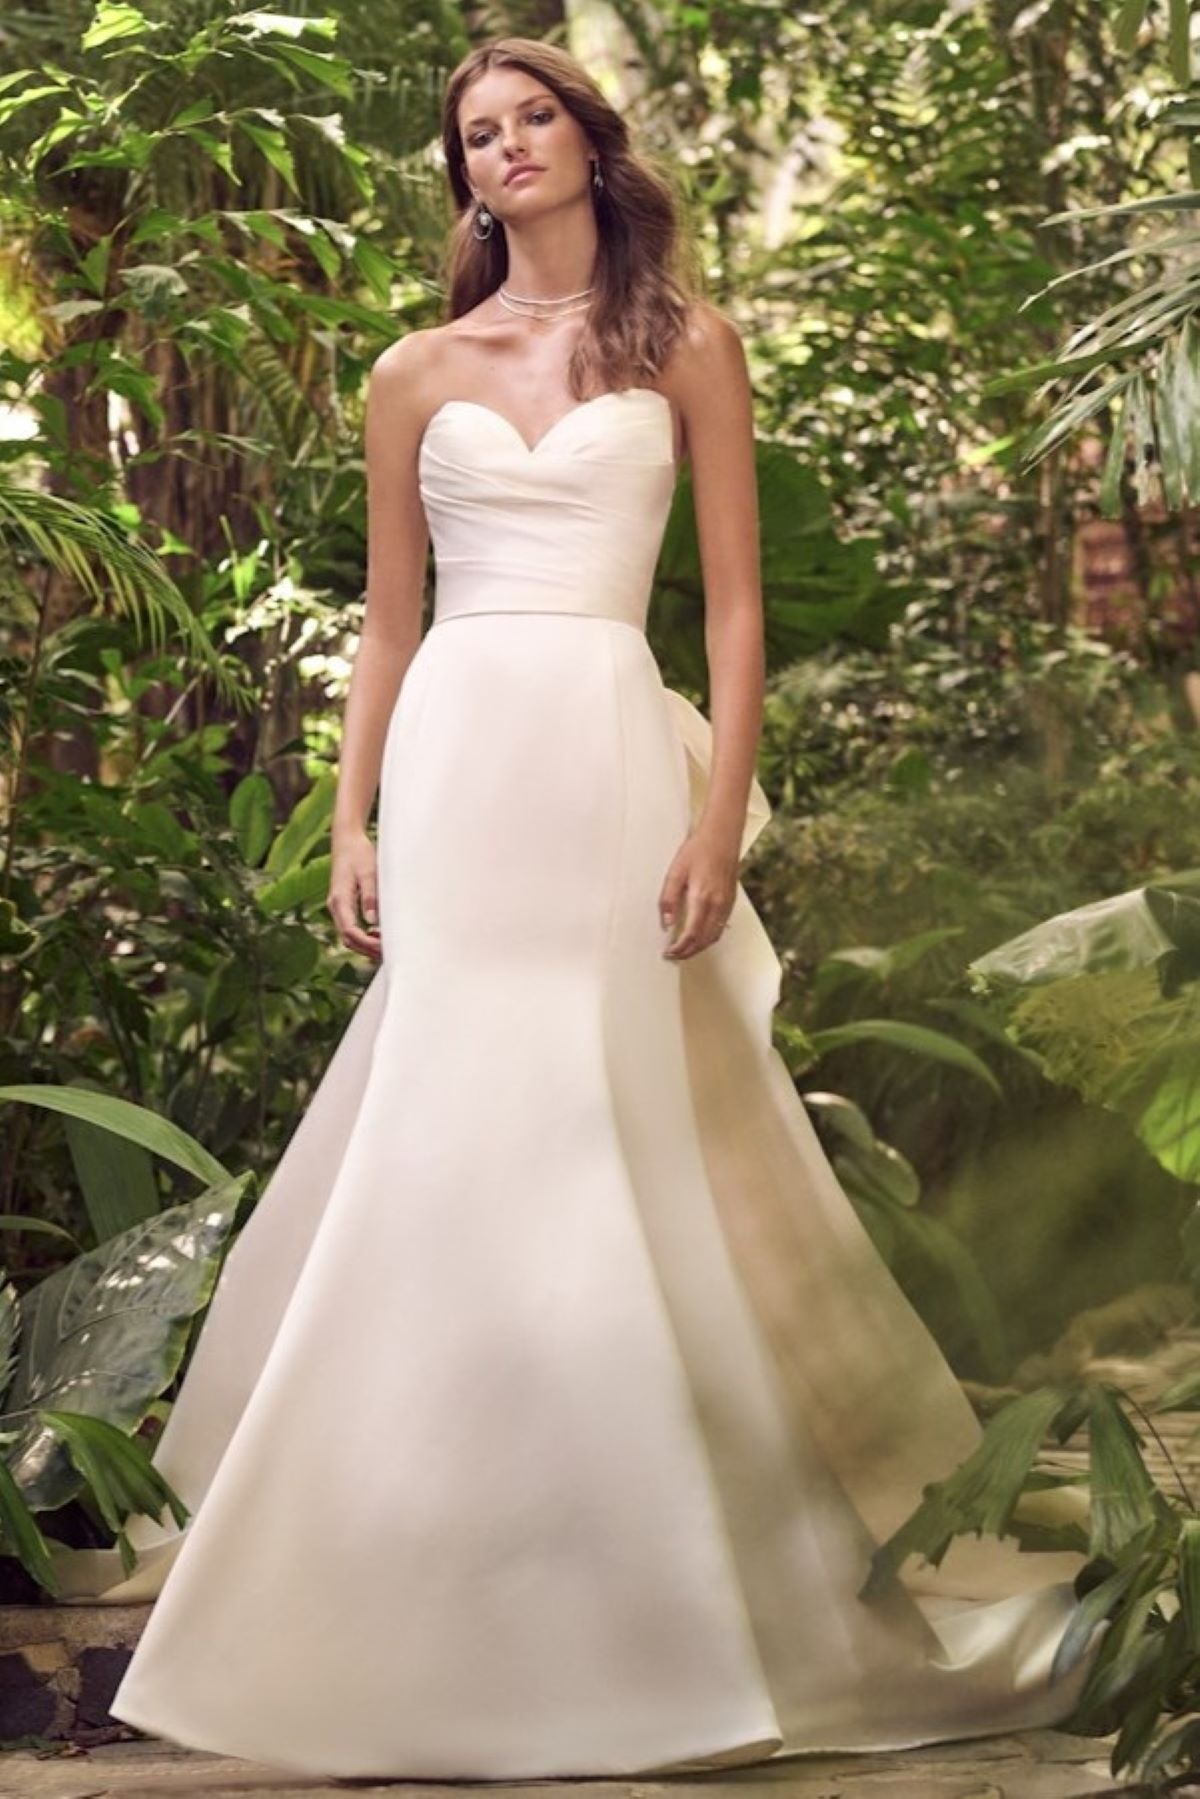 Maggie-Sottero-Hilo-Marie-Fit-and-Flare-Wedding-Dress-24MS201A02-PROMO2-AI.jpg__PID:e092e277-cec9-4d6b-8d6c-7c9fce78ffdc